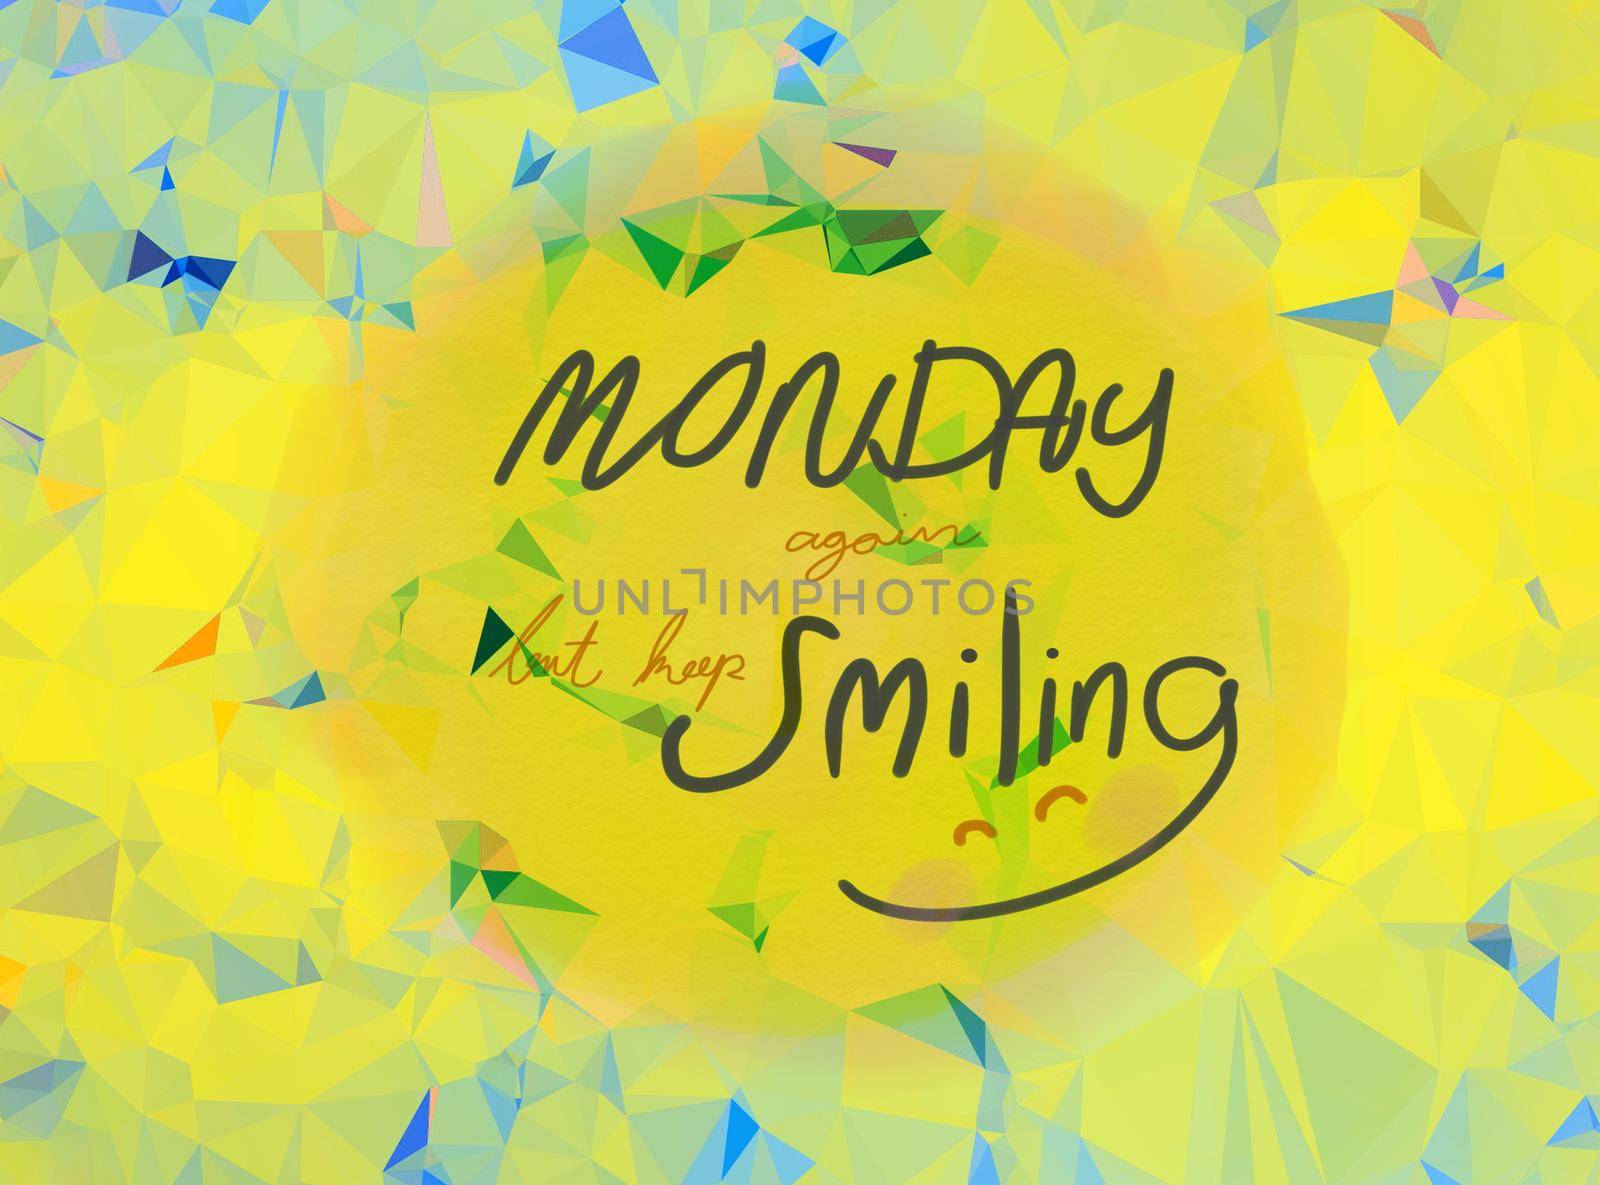 Monday keep smile handwriting on yellow abstract background